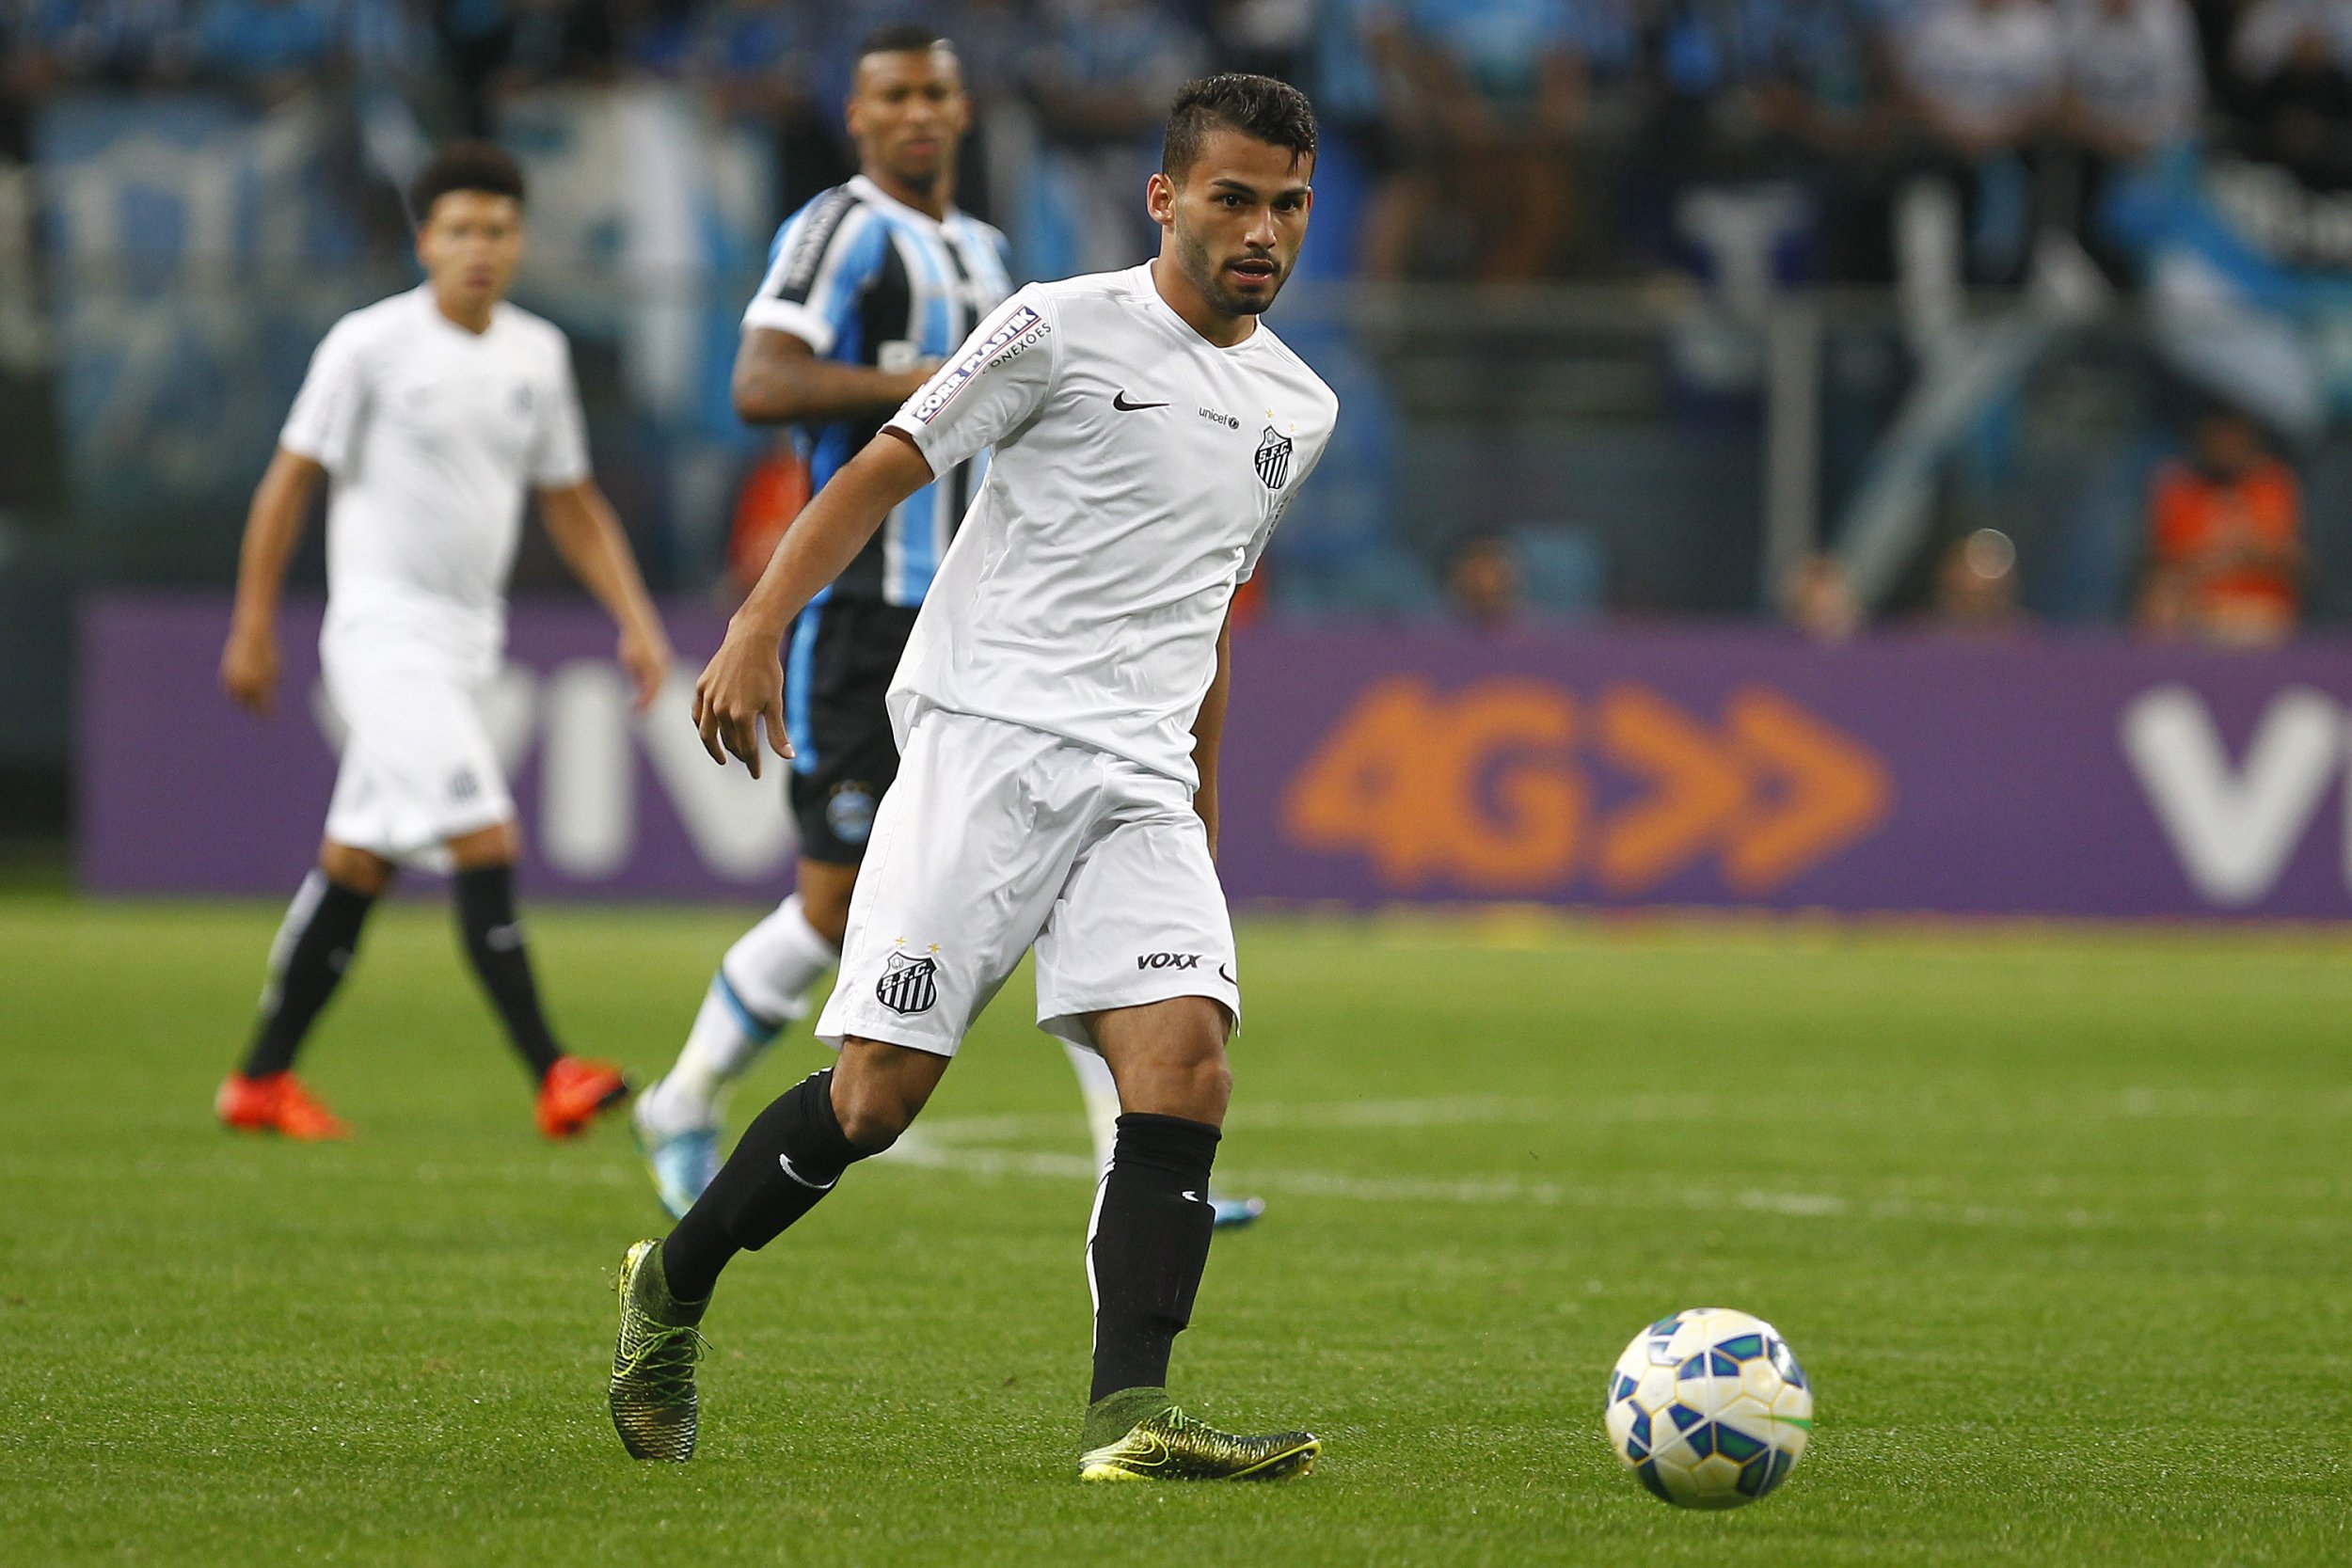 Thiago Maia is a reported target for Manchester United.